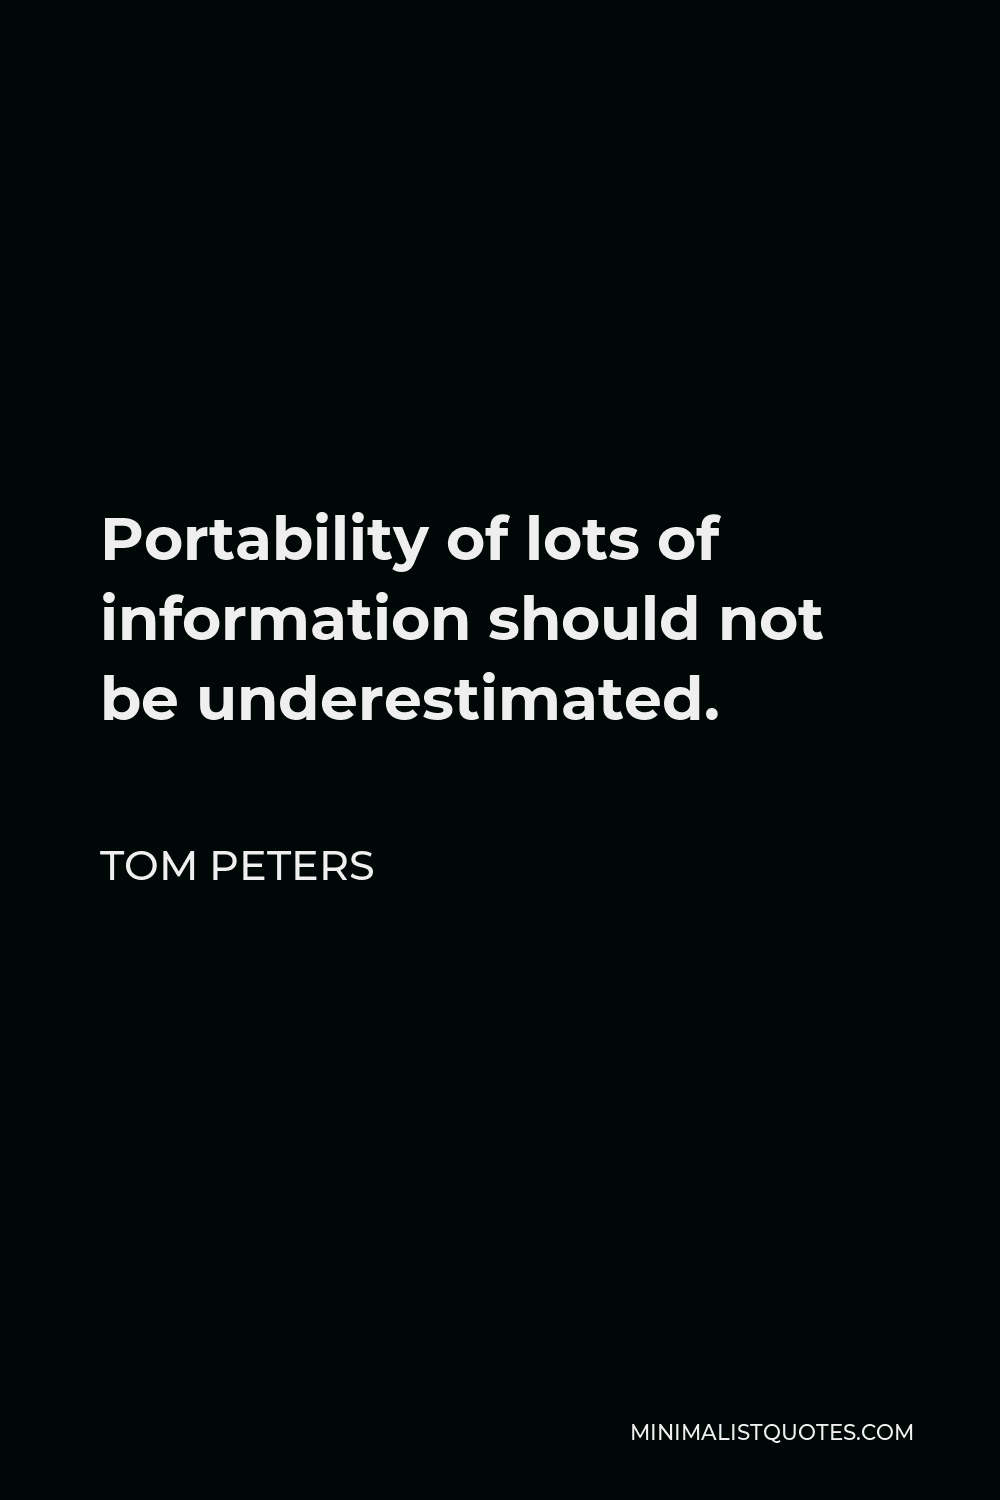 Tom Peters Quote - Portability of lots of information should not be underestimated.